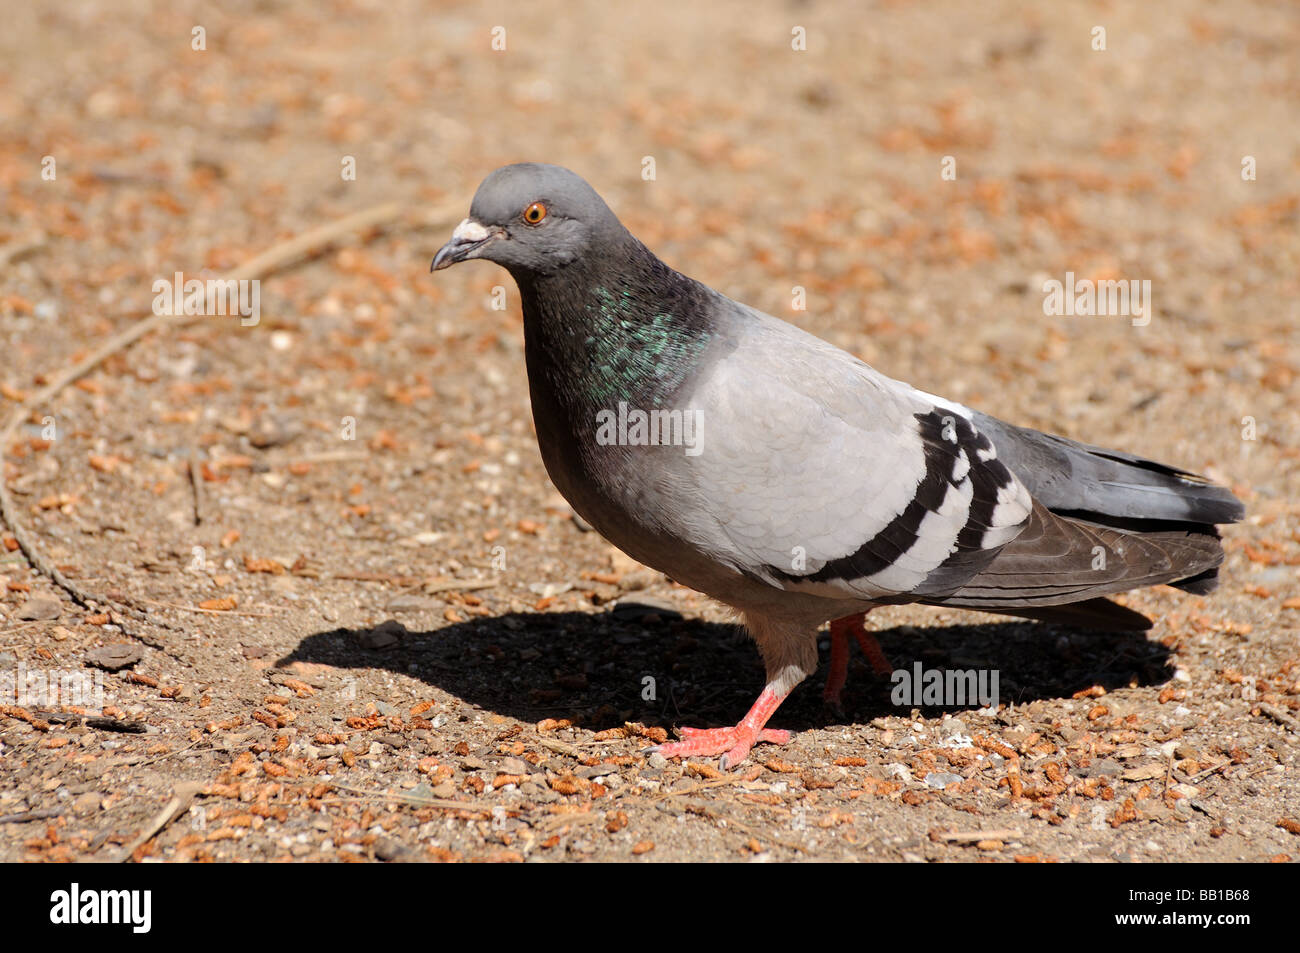 Curious pigeon in a city park Stock Photo